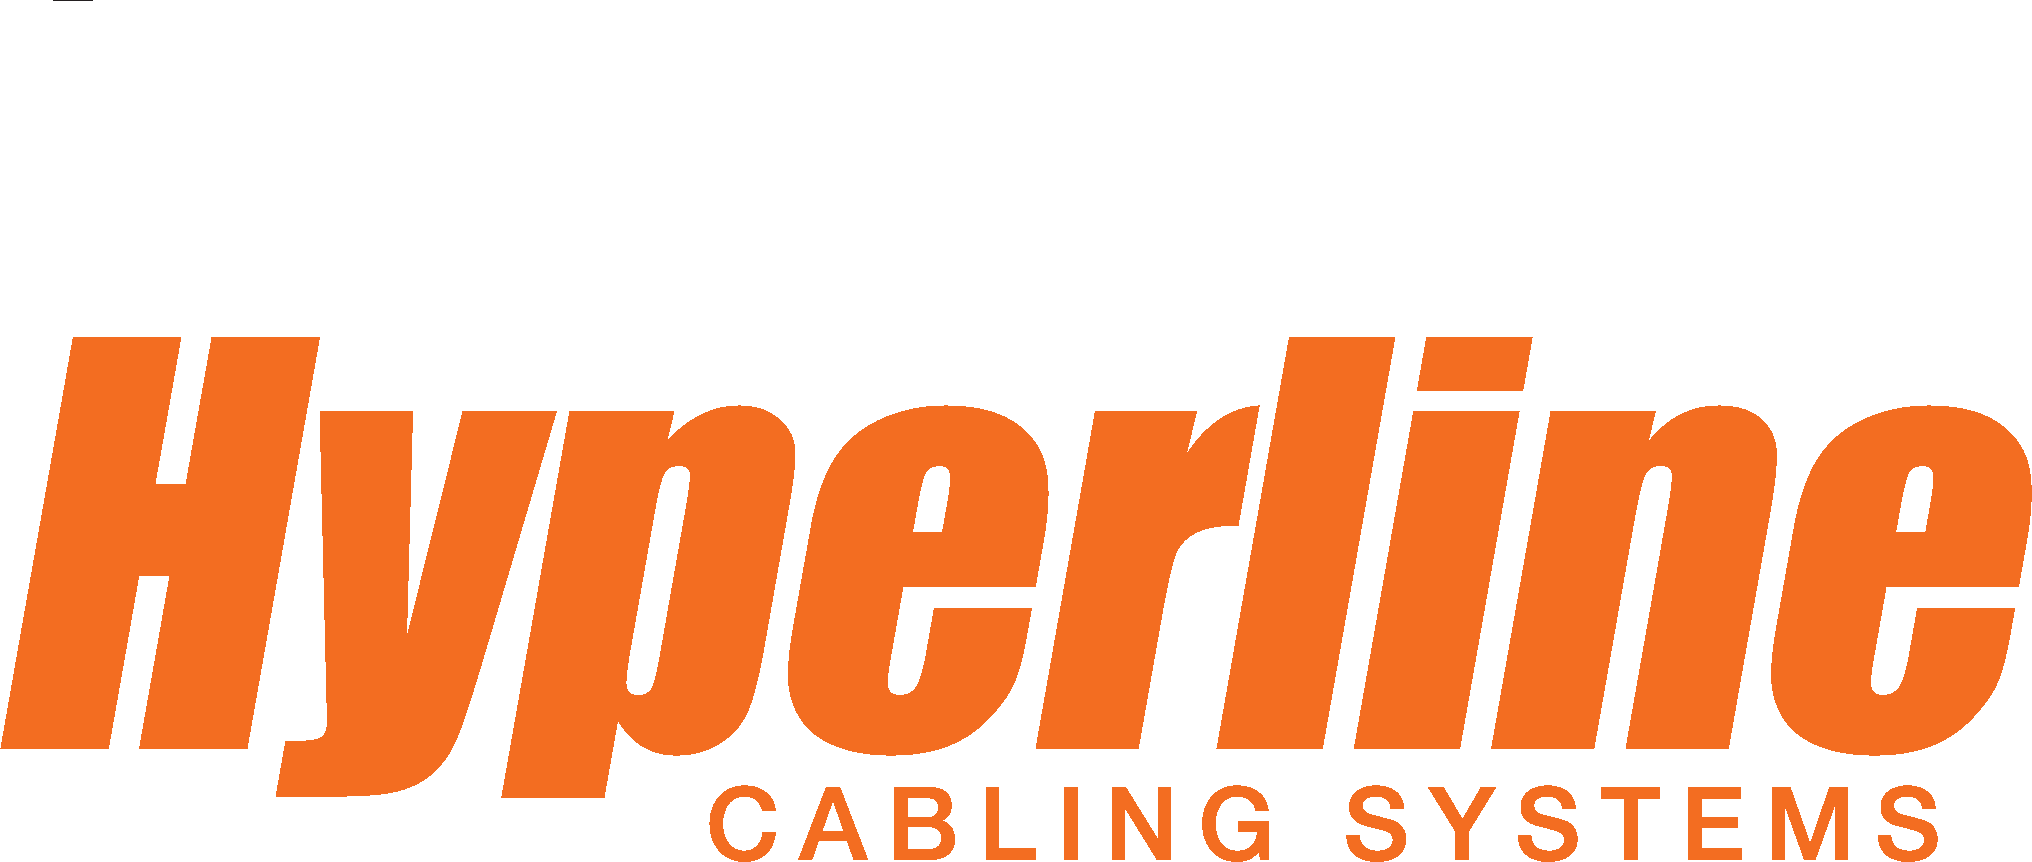 Hyperline Cabling Systems